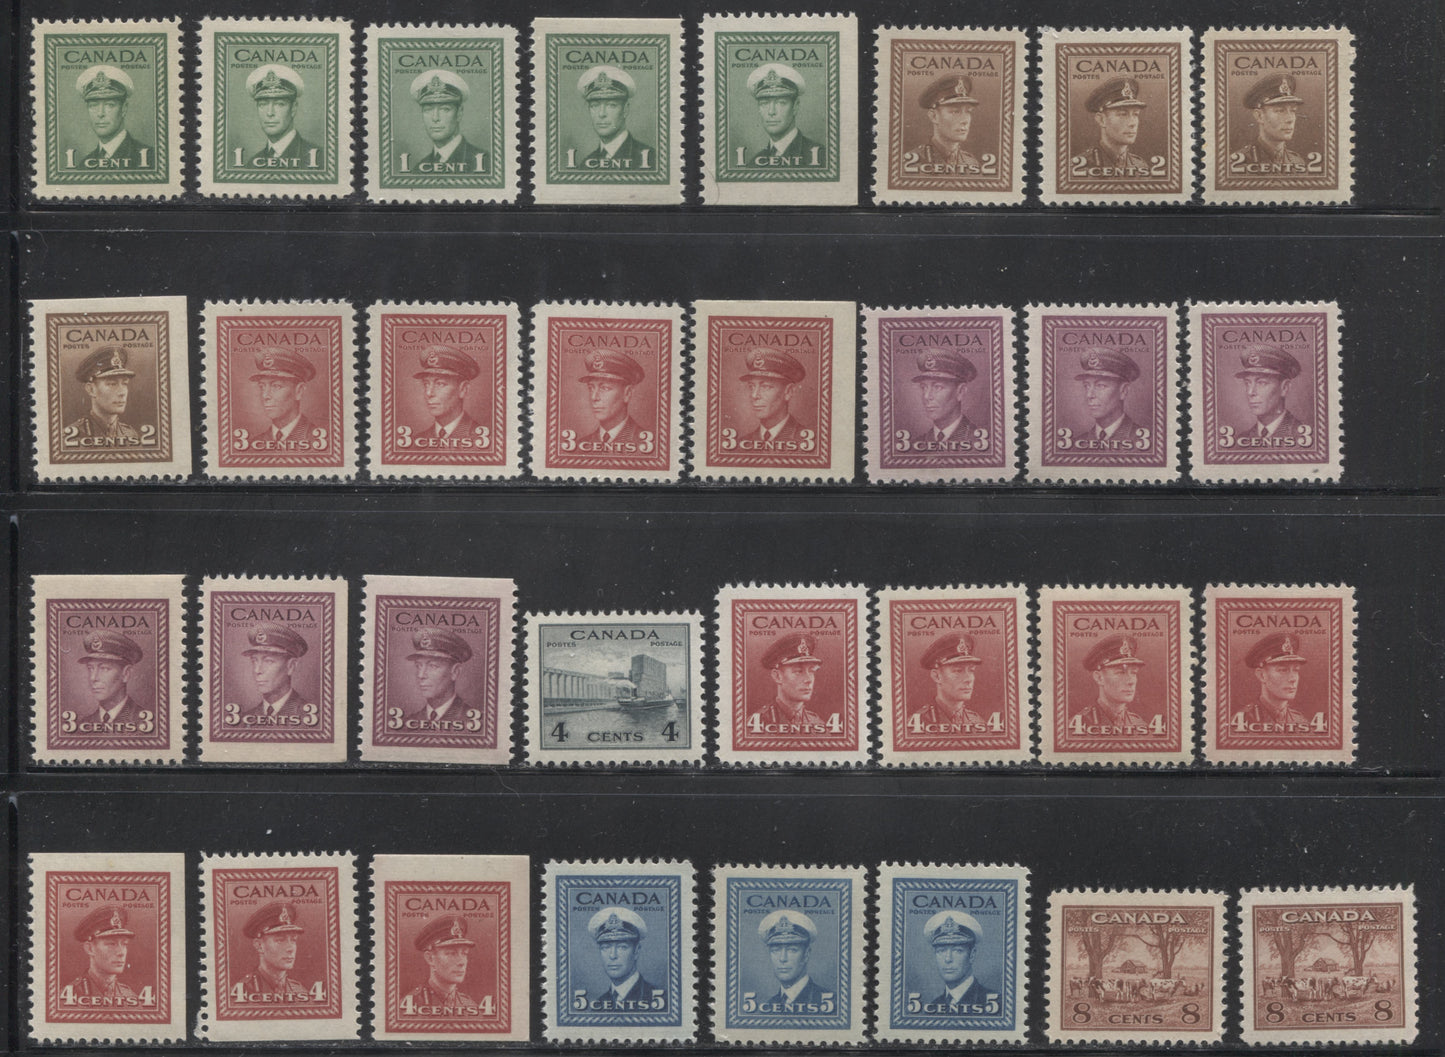 Canada #249/O4 1942-1949 War Effort Issue - Specialized Group of 49 VF NH Low Values From The Set Brixton Chrome 